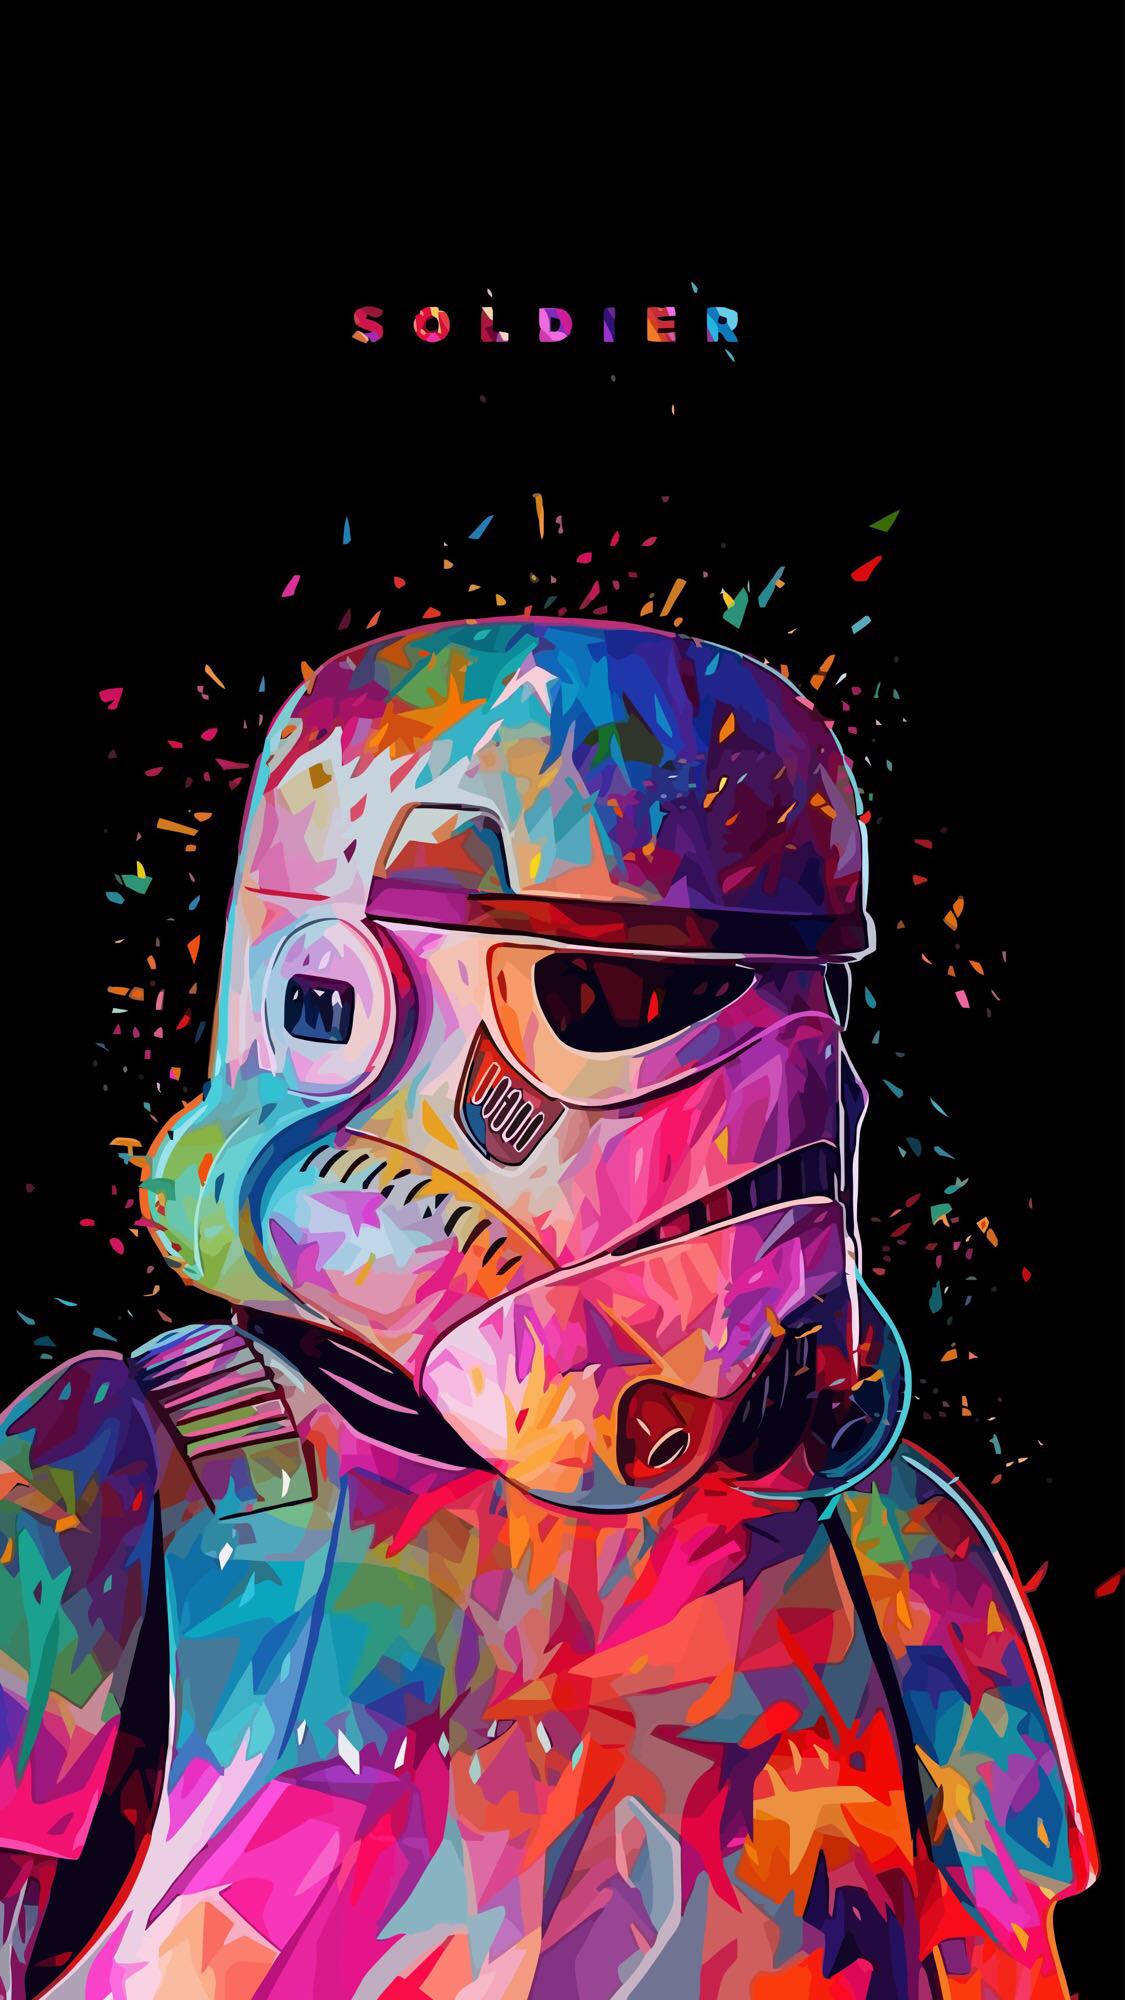 Spread the Star Wars Vibes. iPhone X Wallpaper X